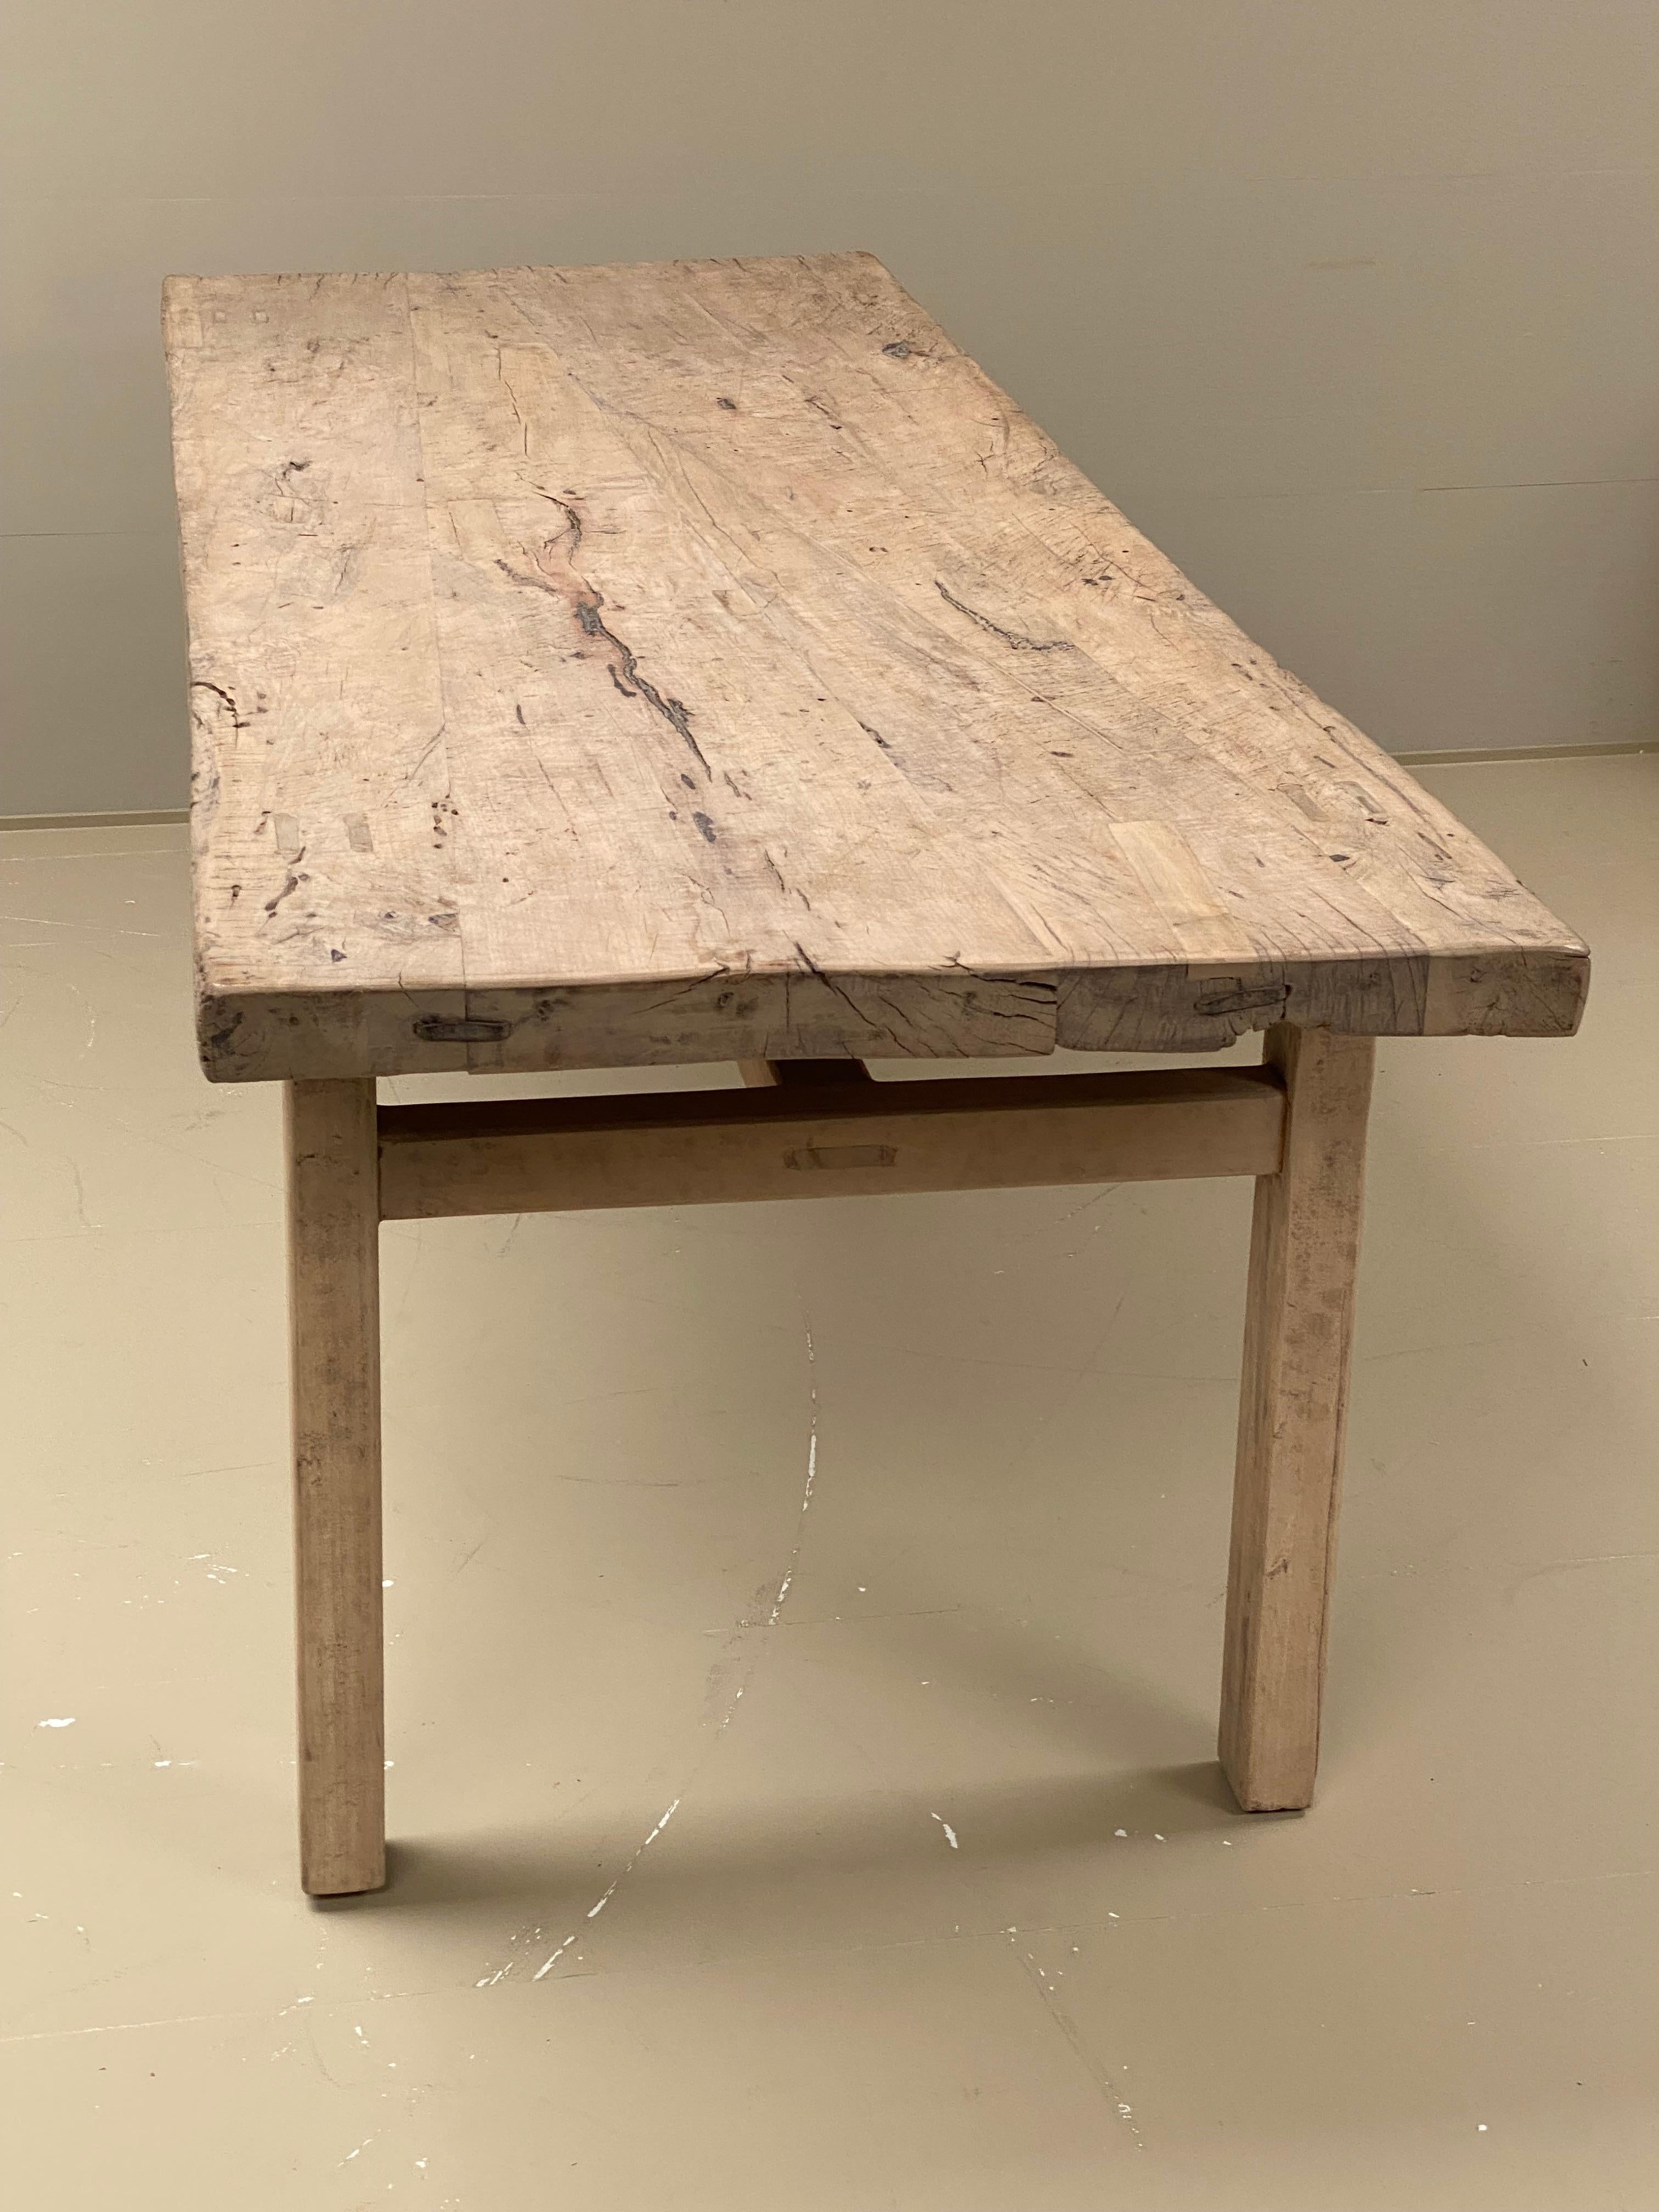 Beautiful rustic French weathered farm table in bleached elm wood,
French Pyrenees from around 1960ties,
good great old patina and a warm and worn finish,
ideal table to put in a kitchen as a dining table or as a working table,
table with a good